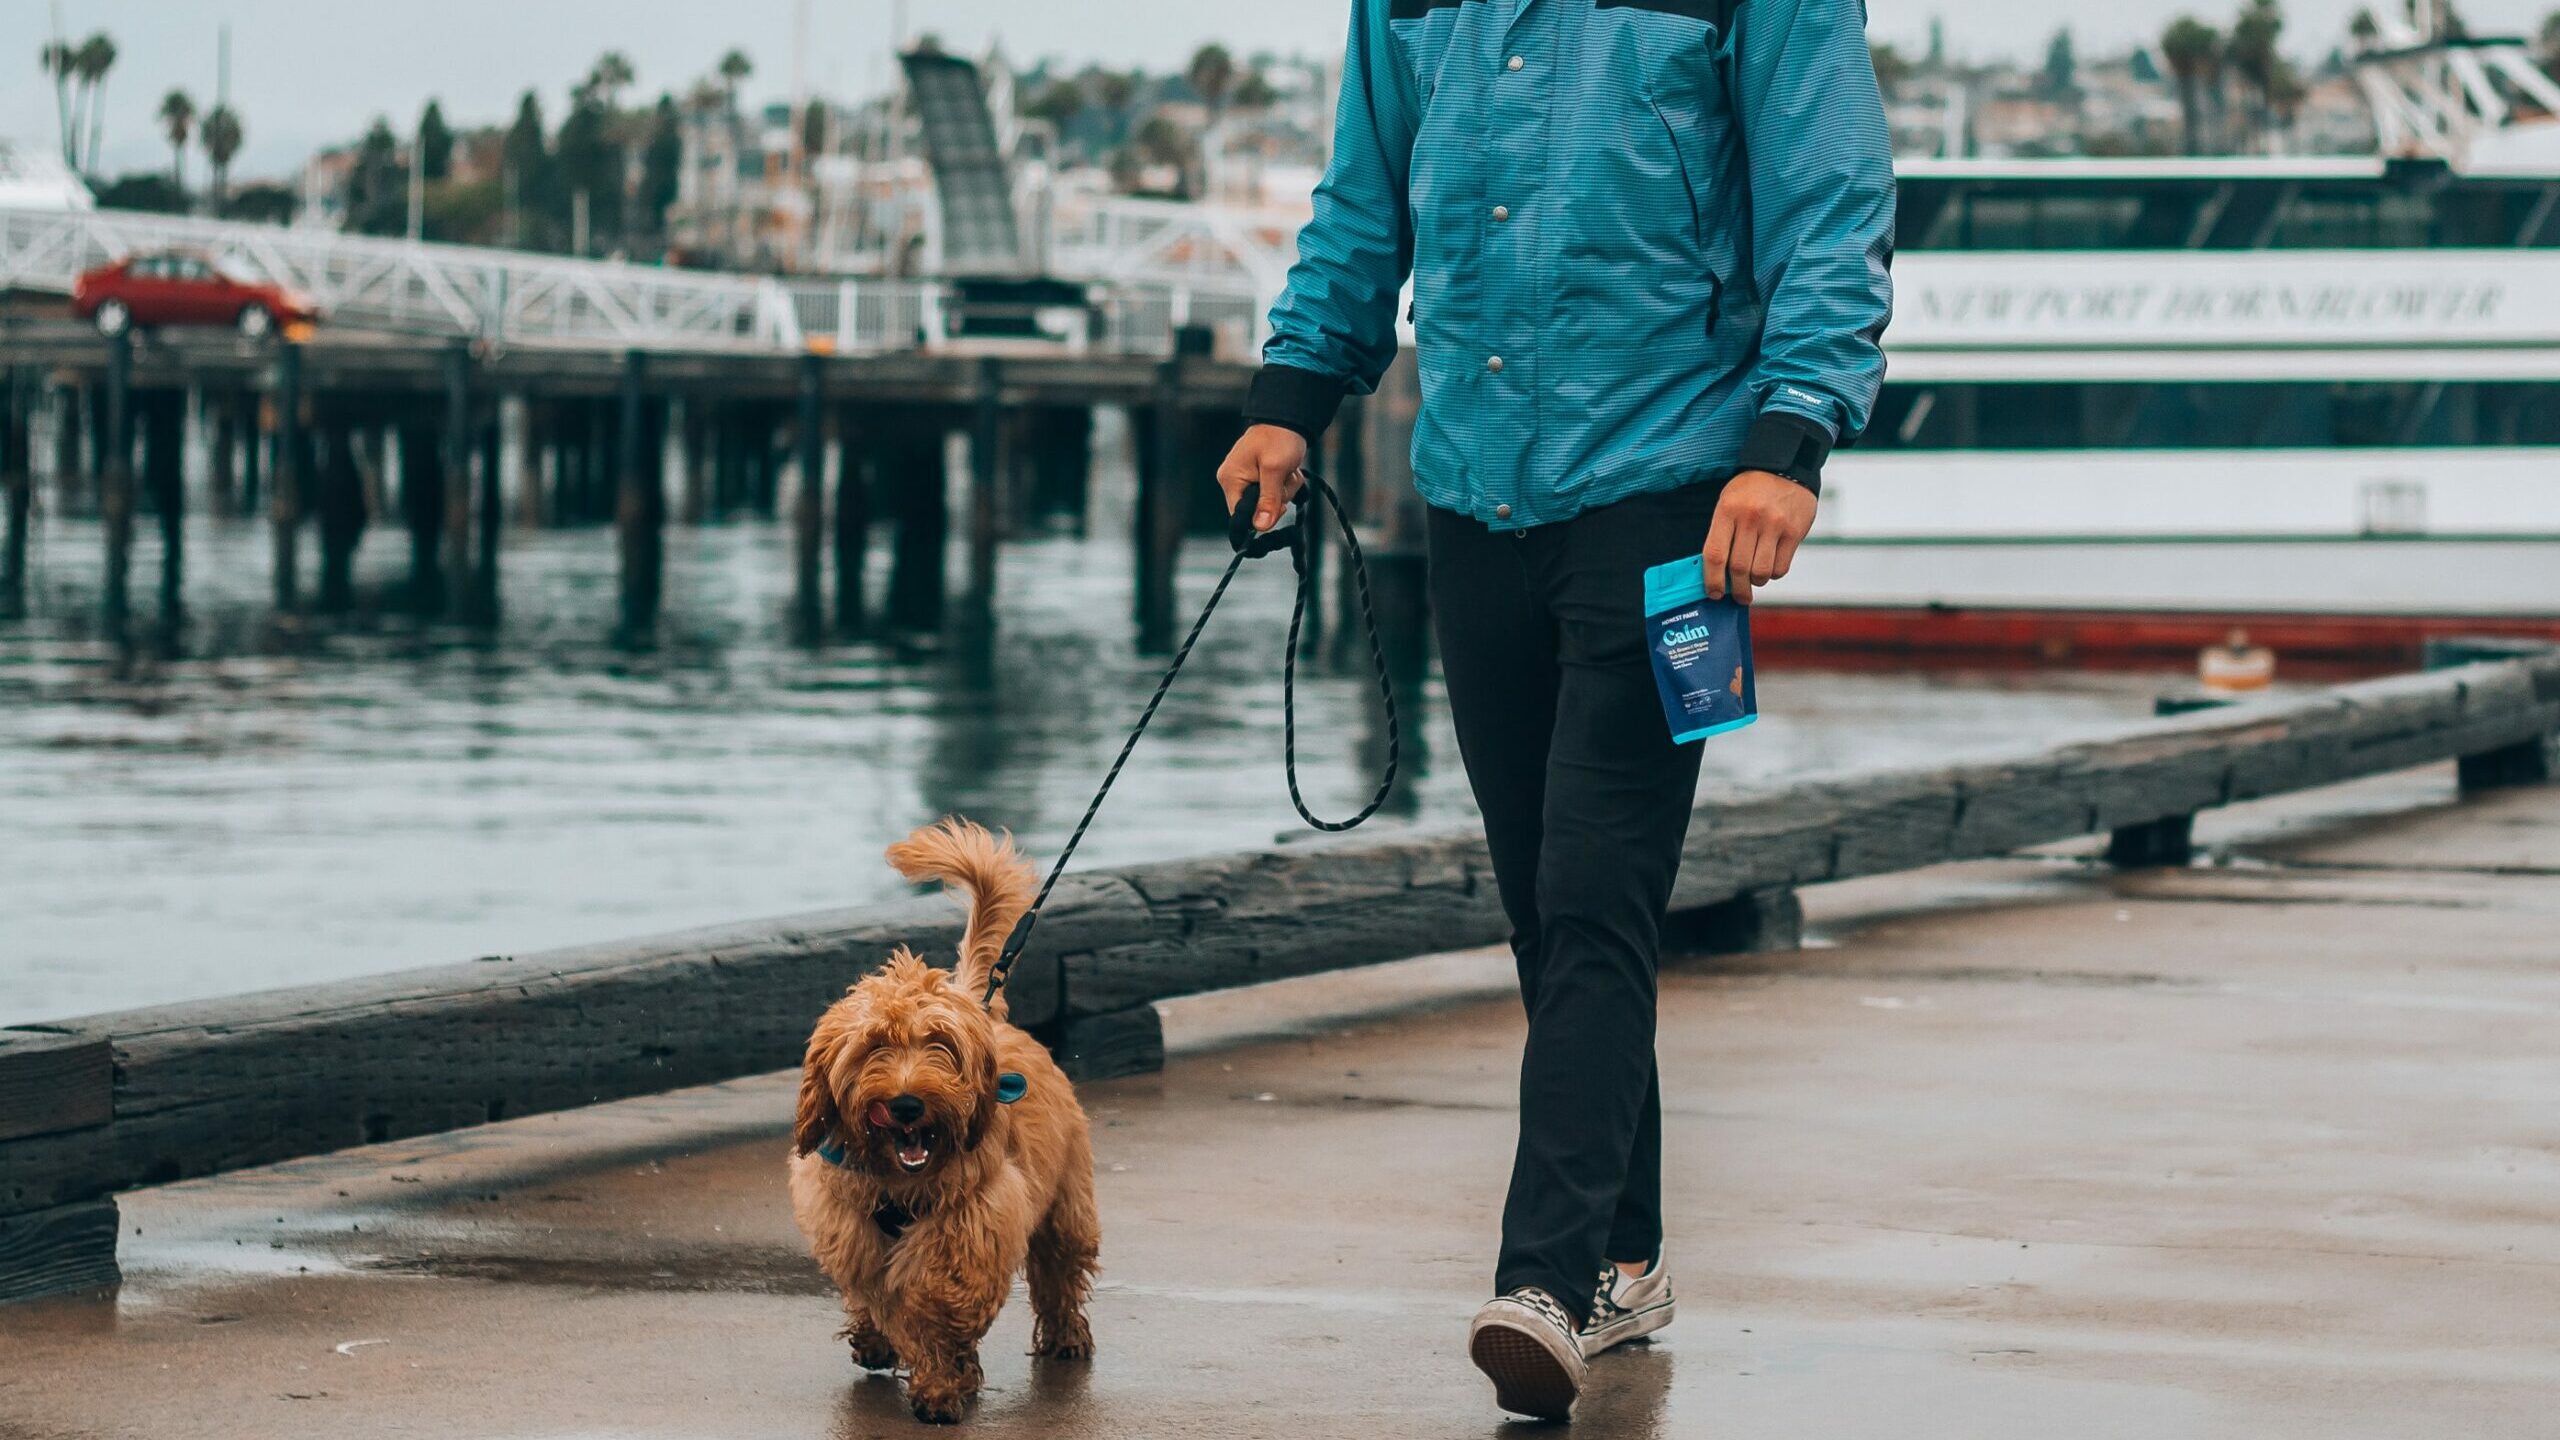 A person walking a dog by some docks.